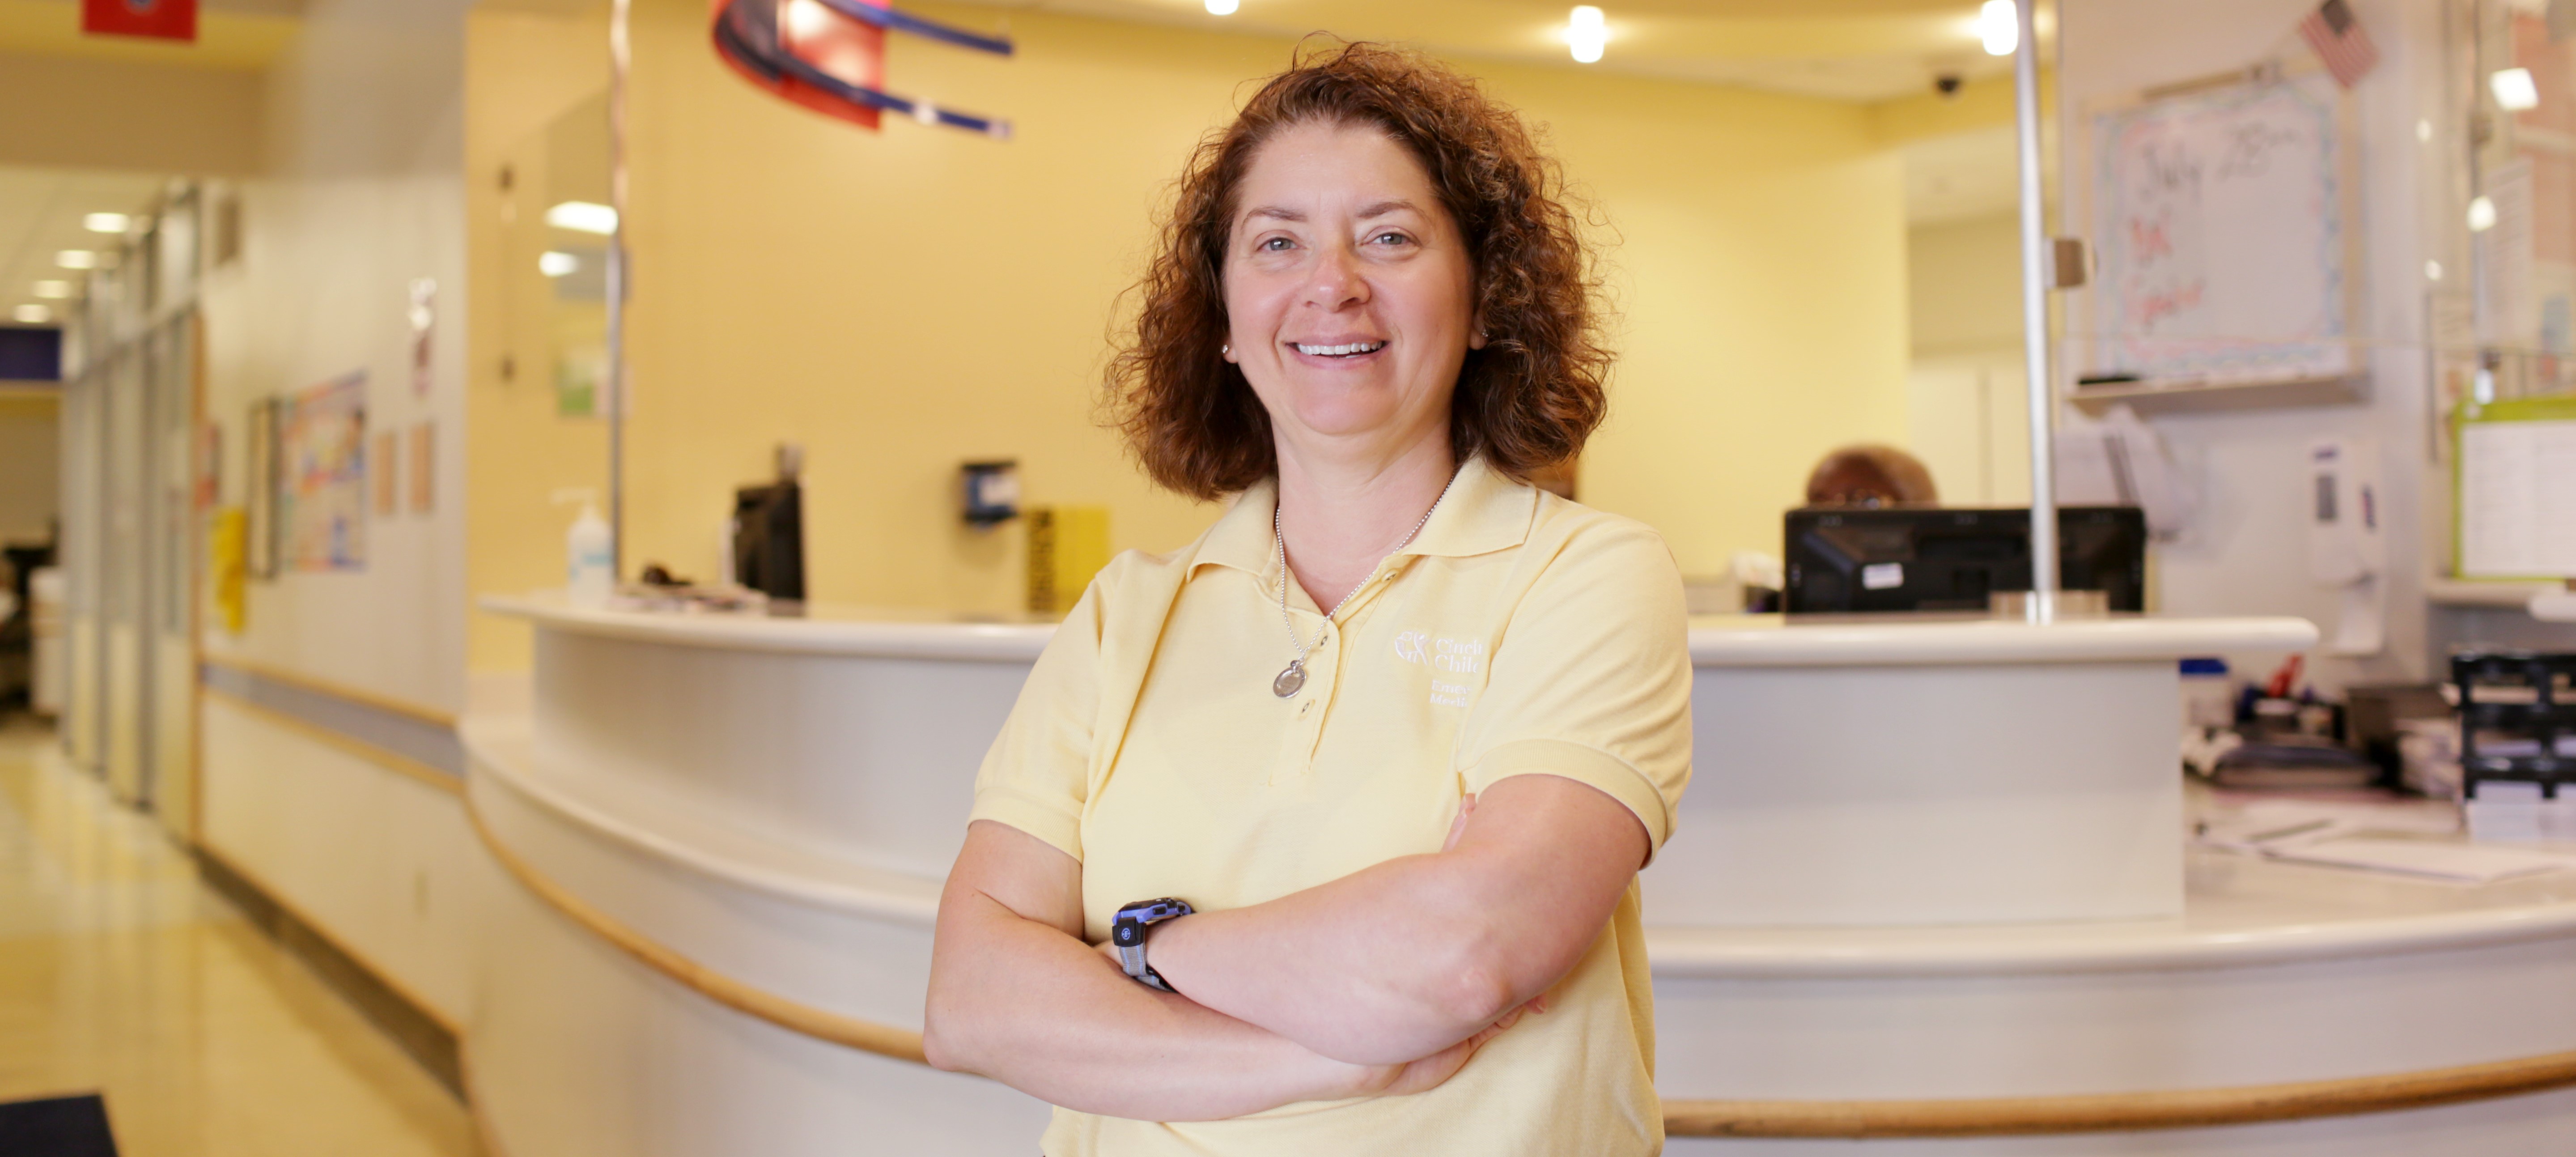 Dr. Wendy Pomeranz in yellow shirt standing in clinic reception area